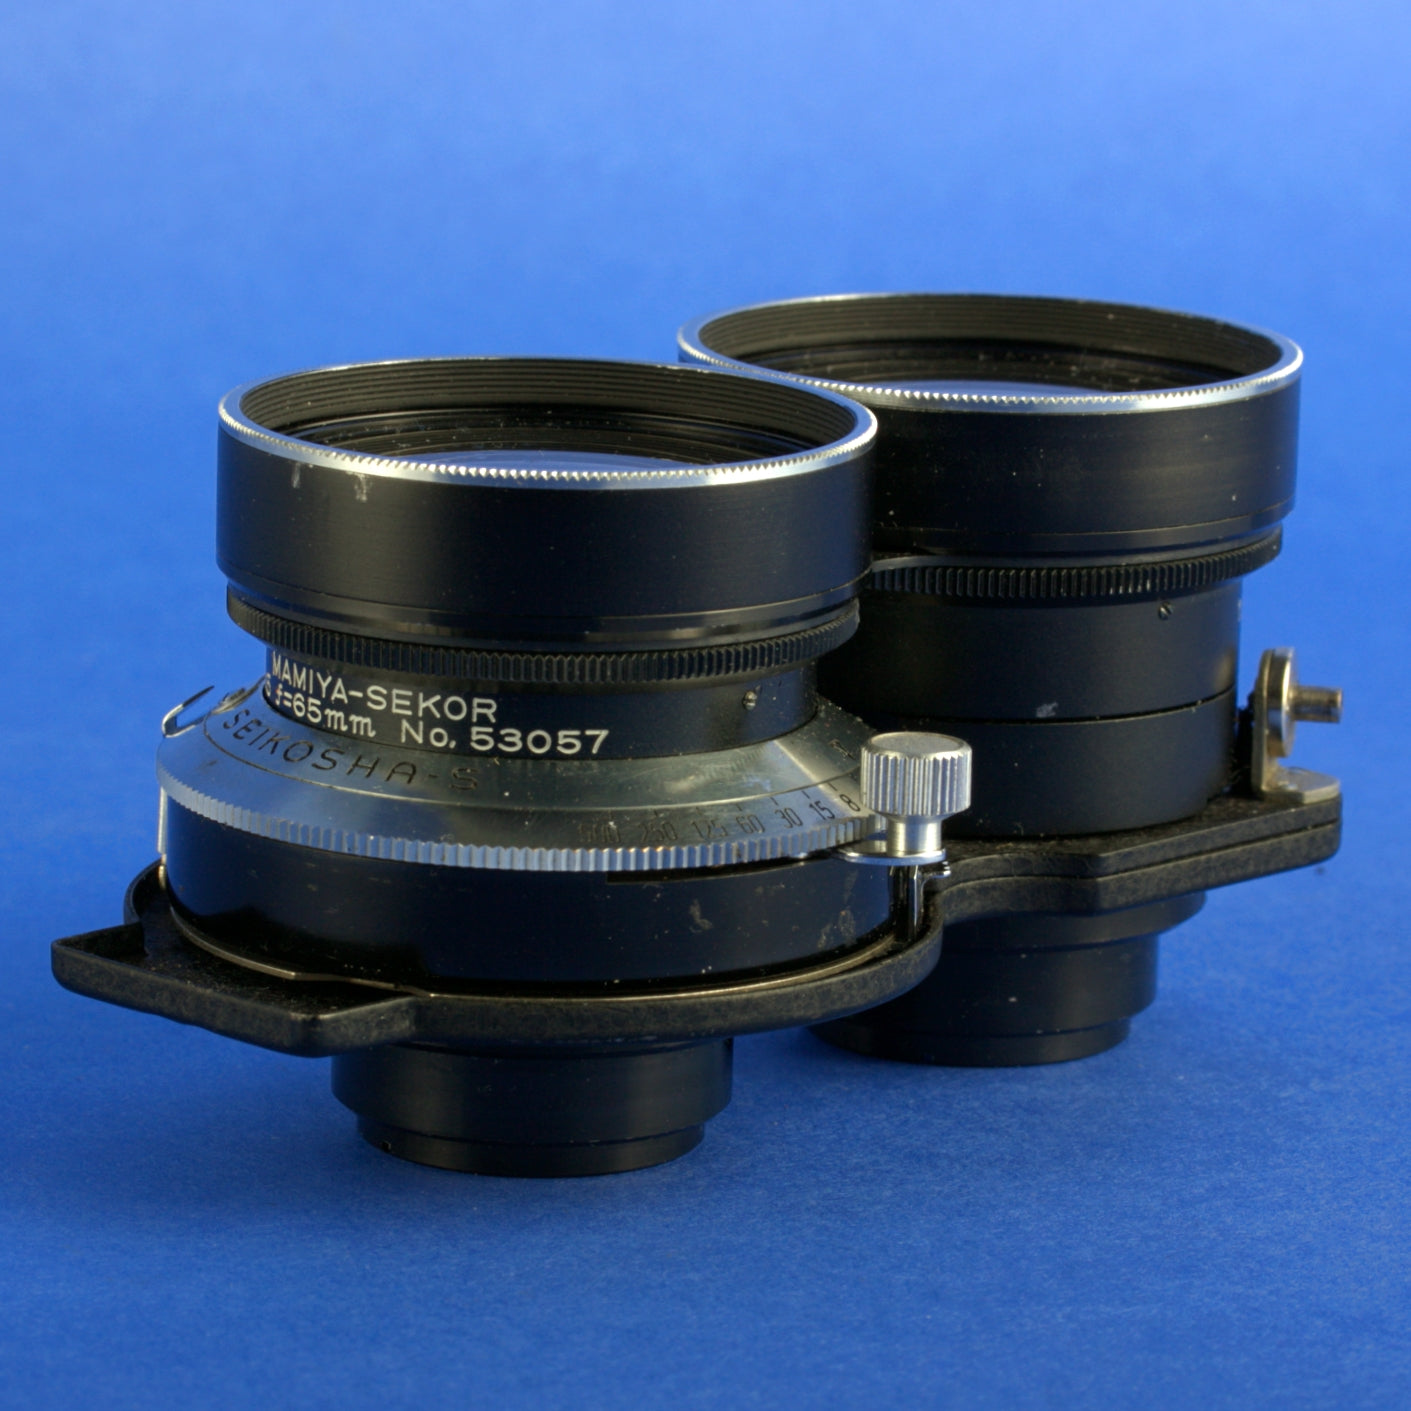 Mamiya 65mm 3.5 TLR Lens For C220, C330 Cameras Not Working